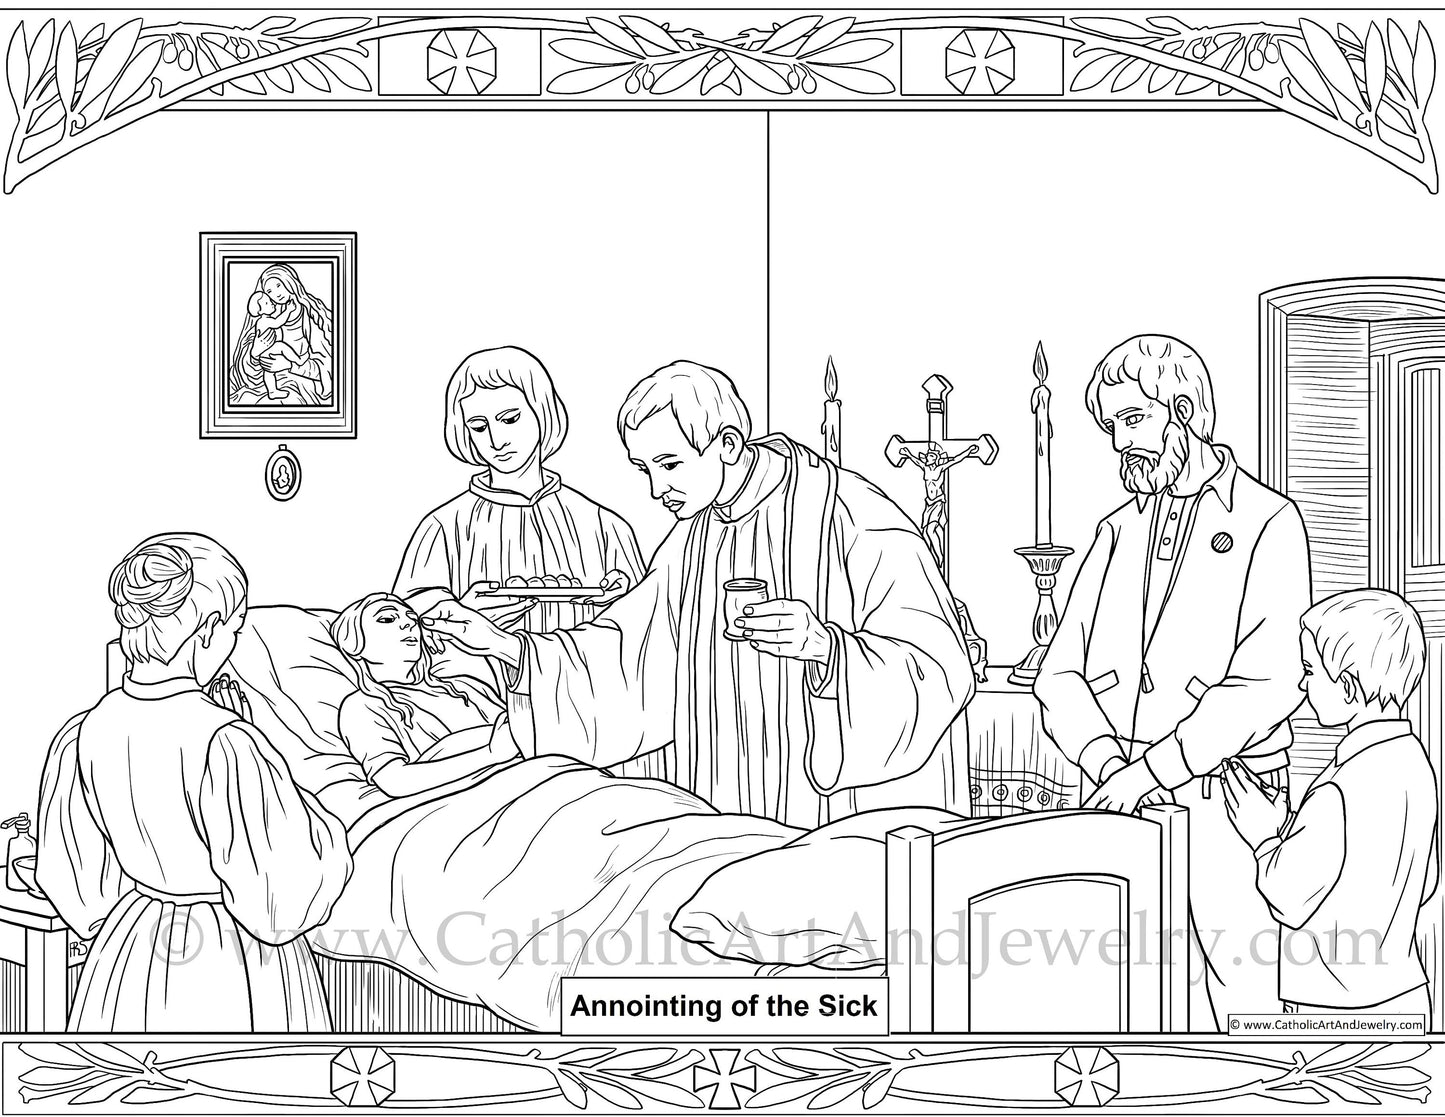 DOWNLOADABLE 7 Sacraments Coloring Pages – For home, school, or CCD – Catholic Catechism – Catholic Education – Catholic Kids